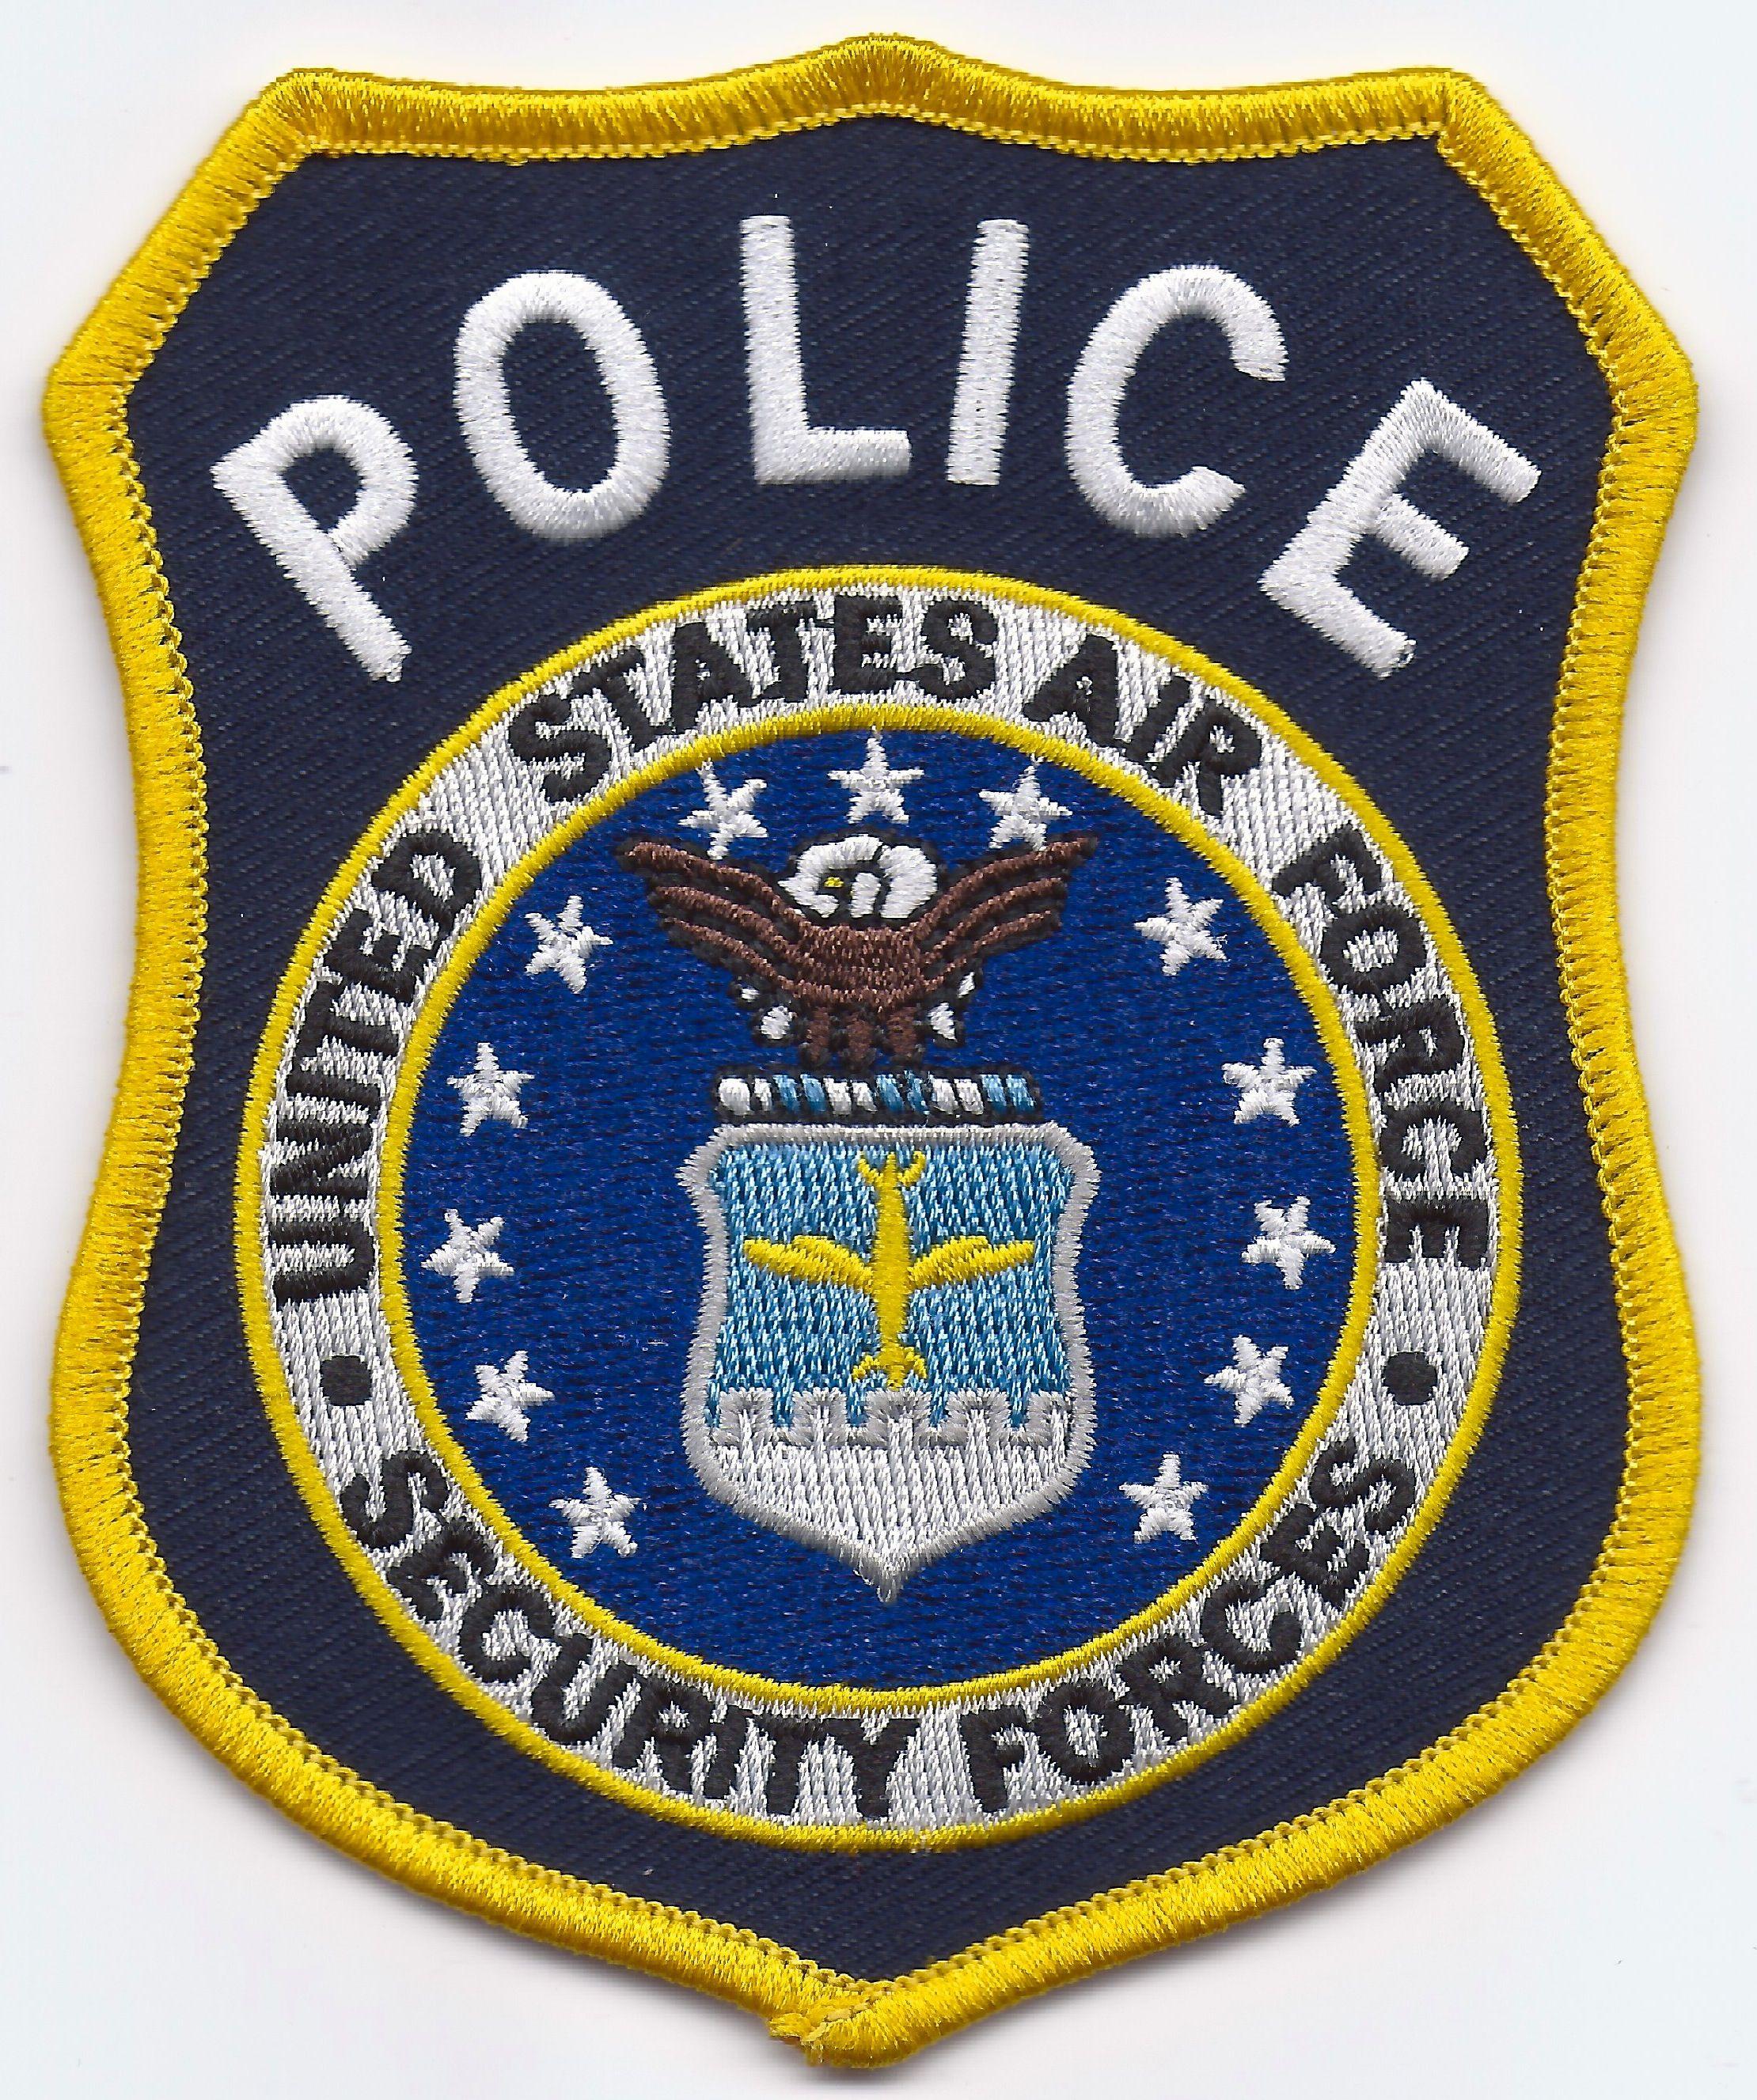 Air Force Security Forces Logo - File:United States Air Force Security Forces Police Patch.jpeg ...